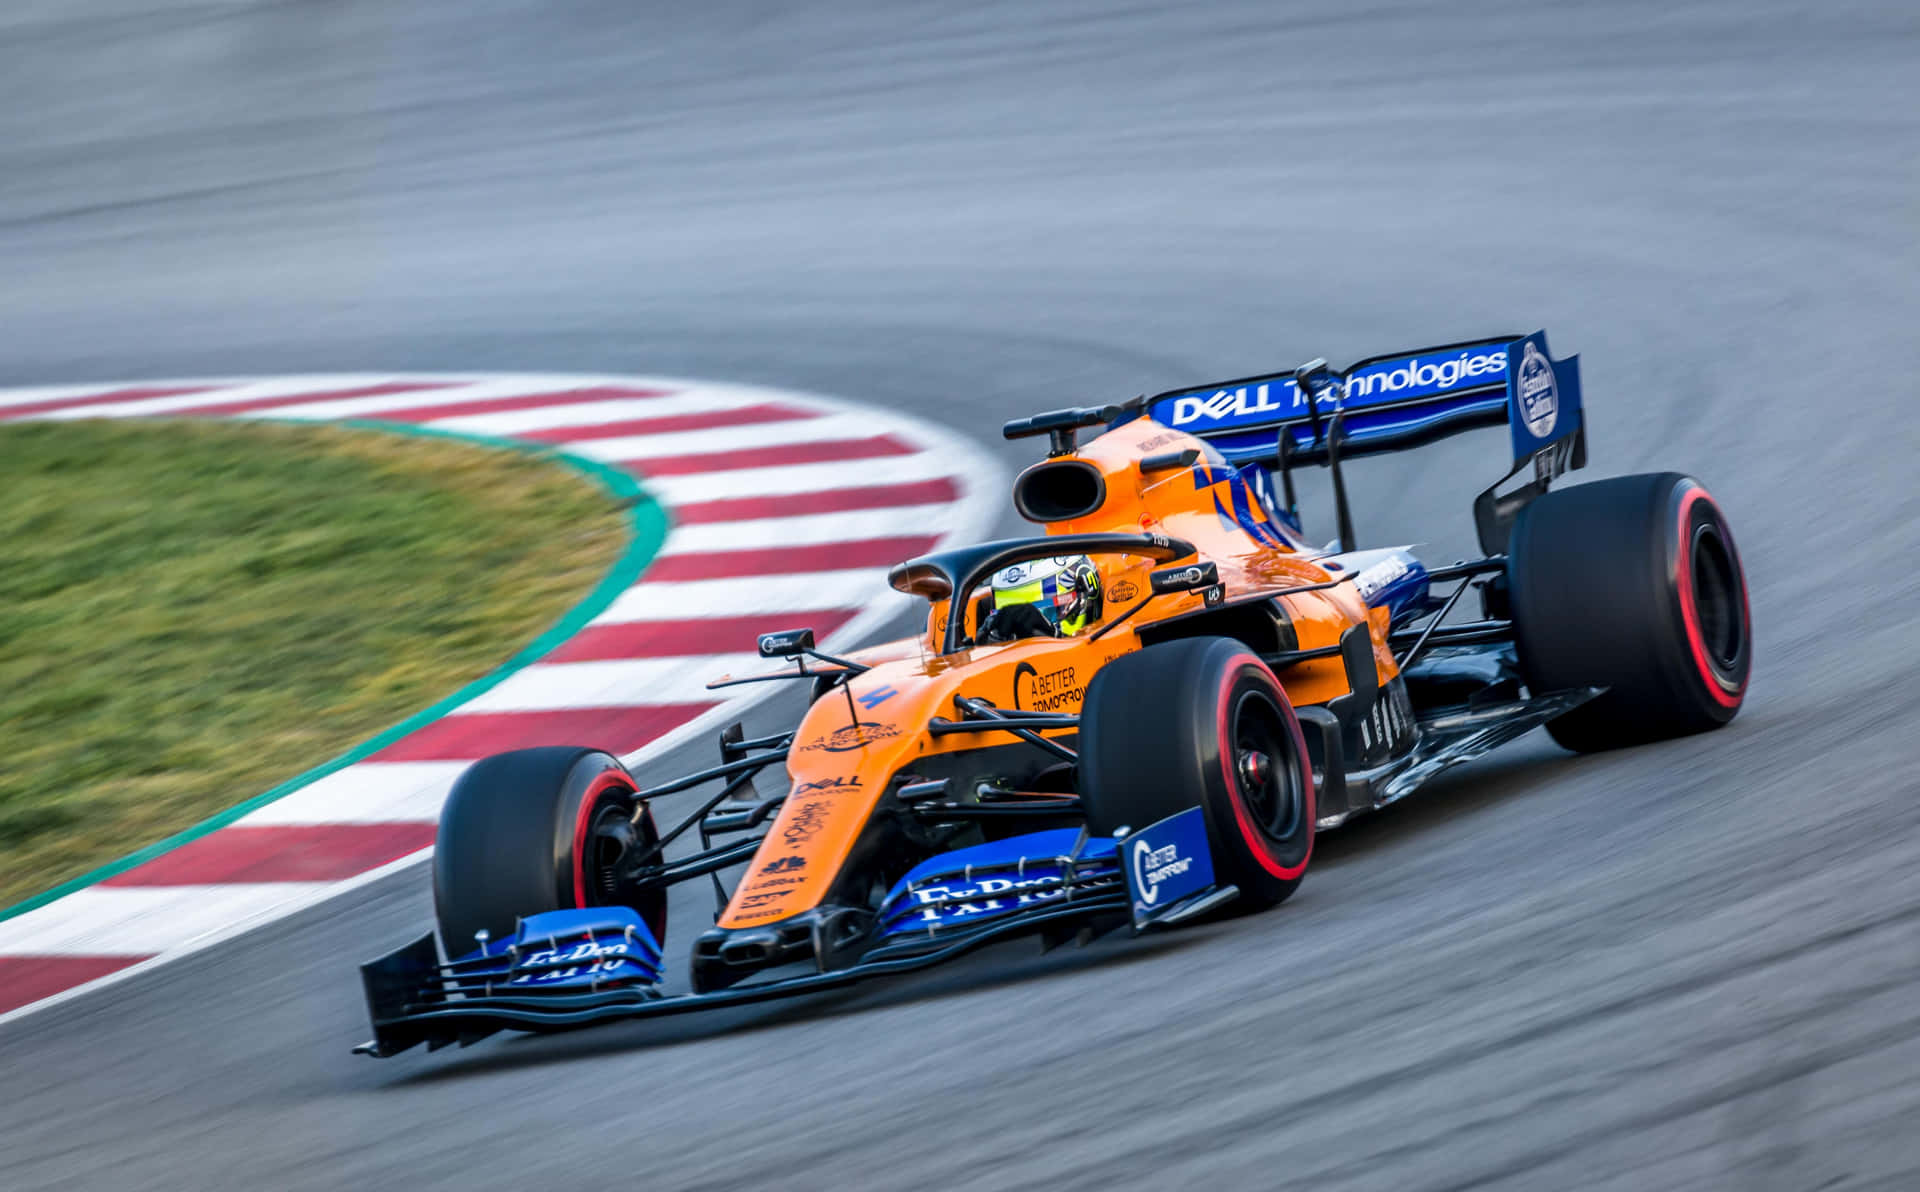 Lando Norris charts a new course in Formula 1